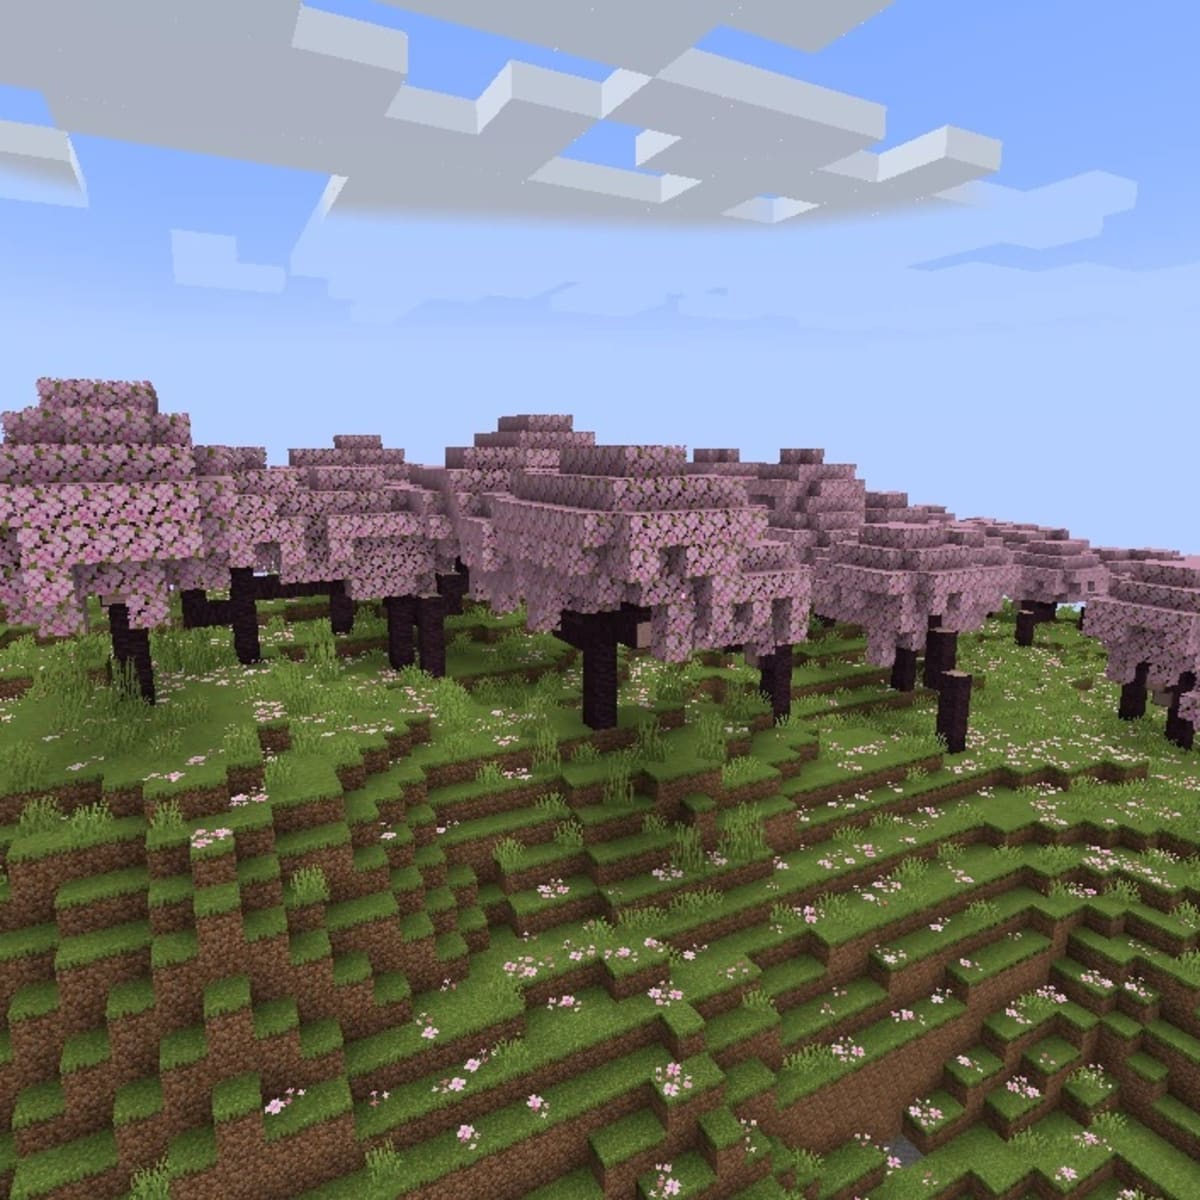 Minecraft 1.20: What We Know About Biomes, Mobs, & A Release Date